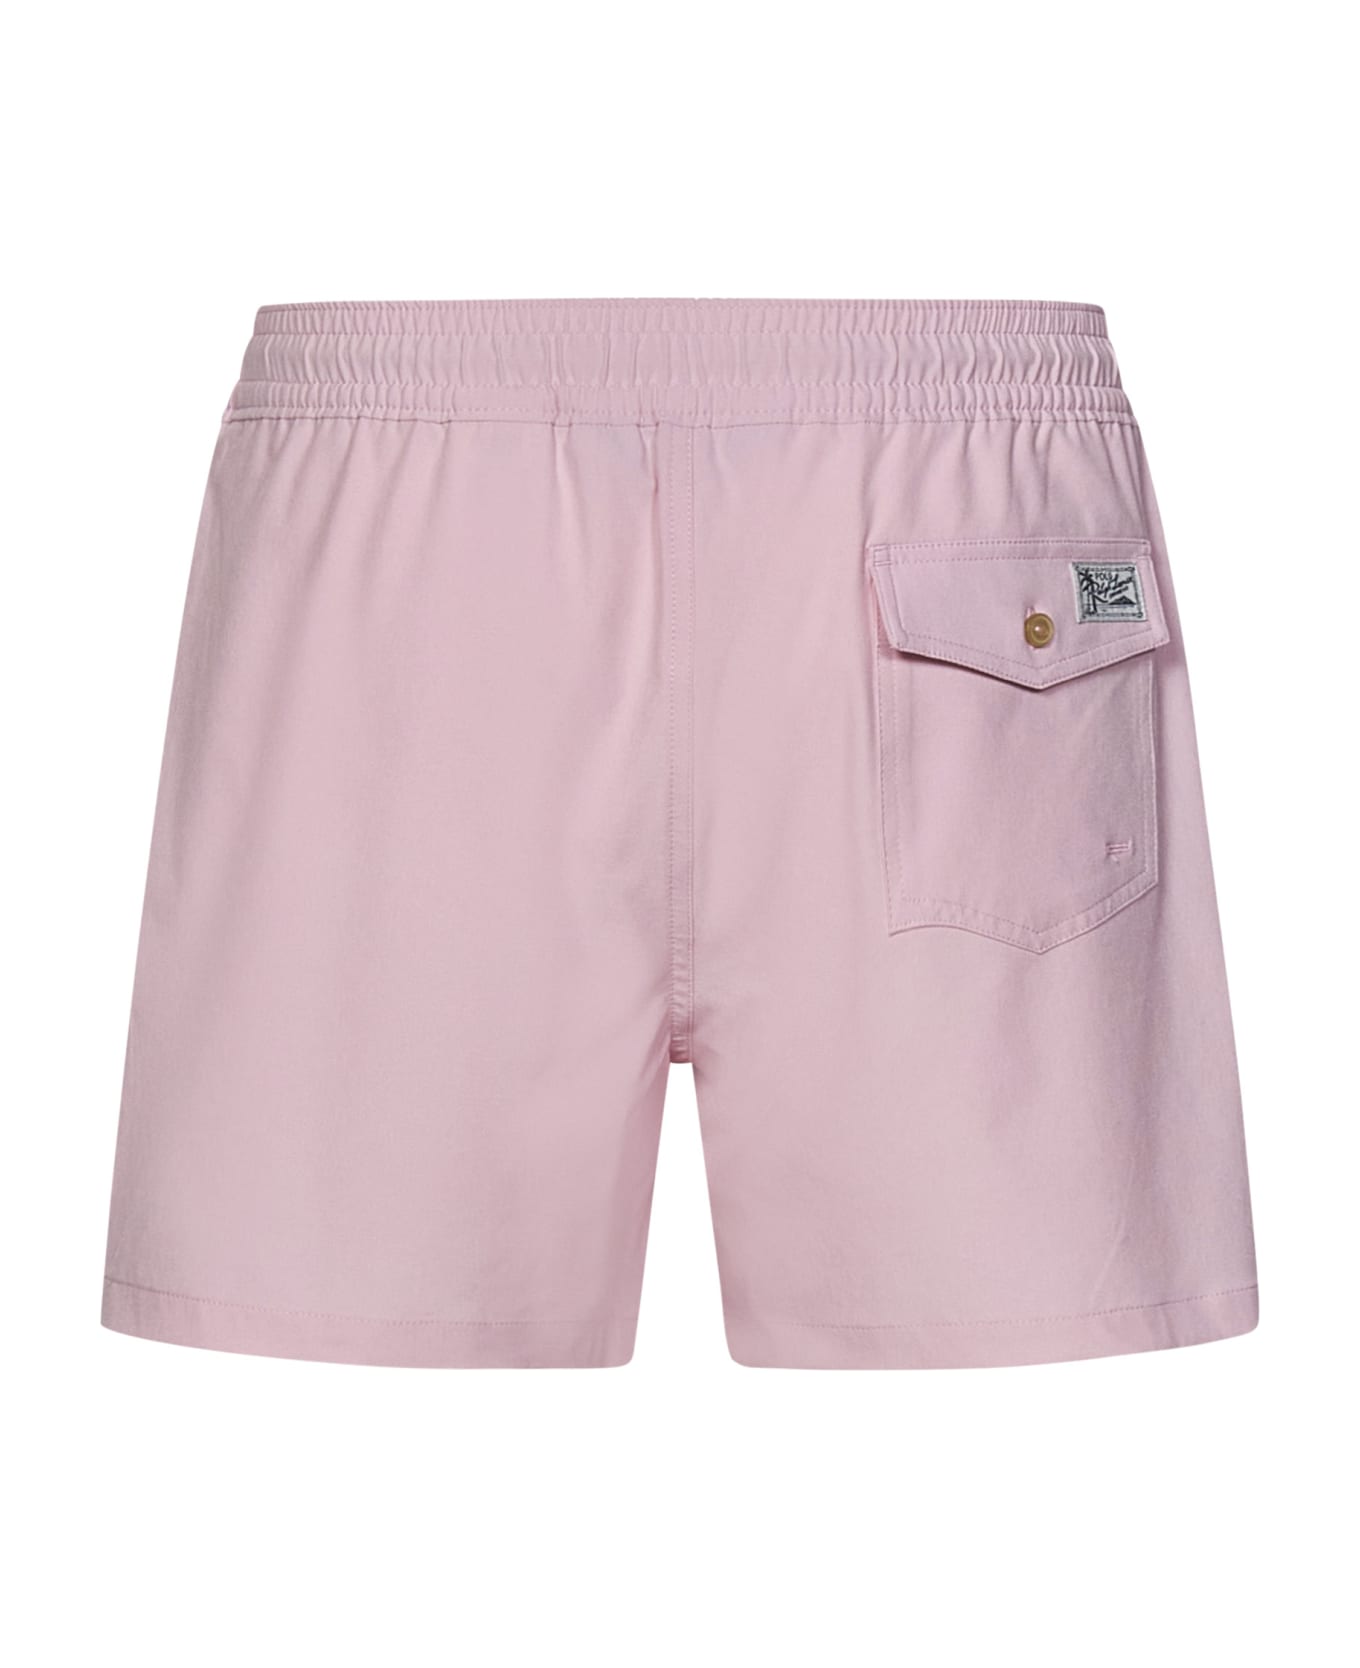 Polo Ralph Lauren Pink Stretch Polyester Swimming Shorts - GARDENPINK